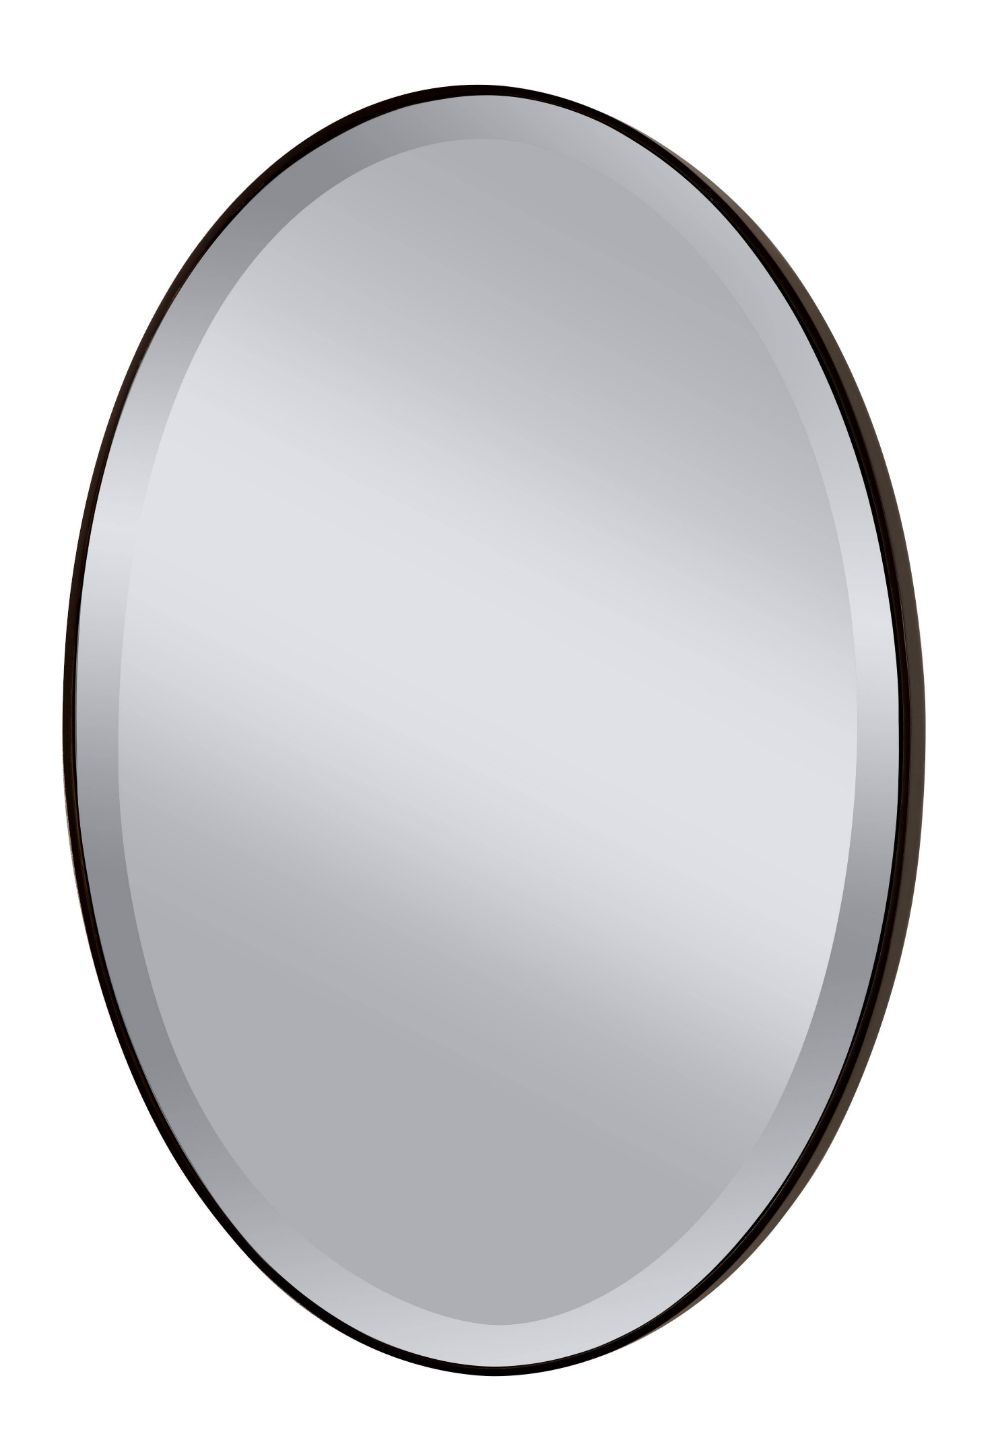 Feiss Johnson Oil Rubbed Bronze Mirror | Oval Mirror, Oval Wall Mirror For Oil Rubbed Bronze Oval Wall Mirrors (View 9 of 15)